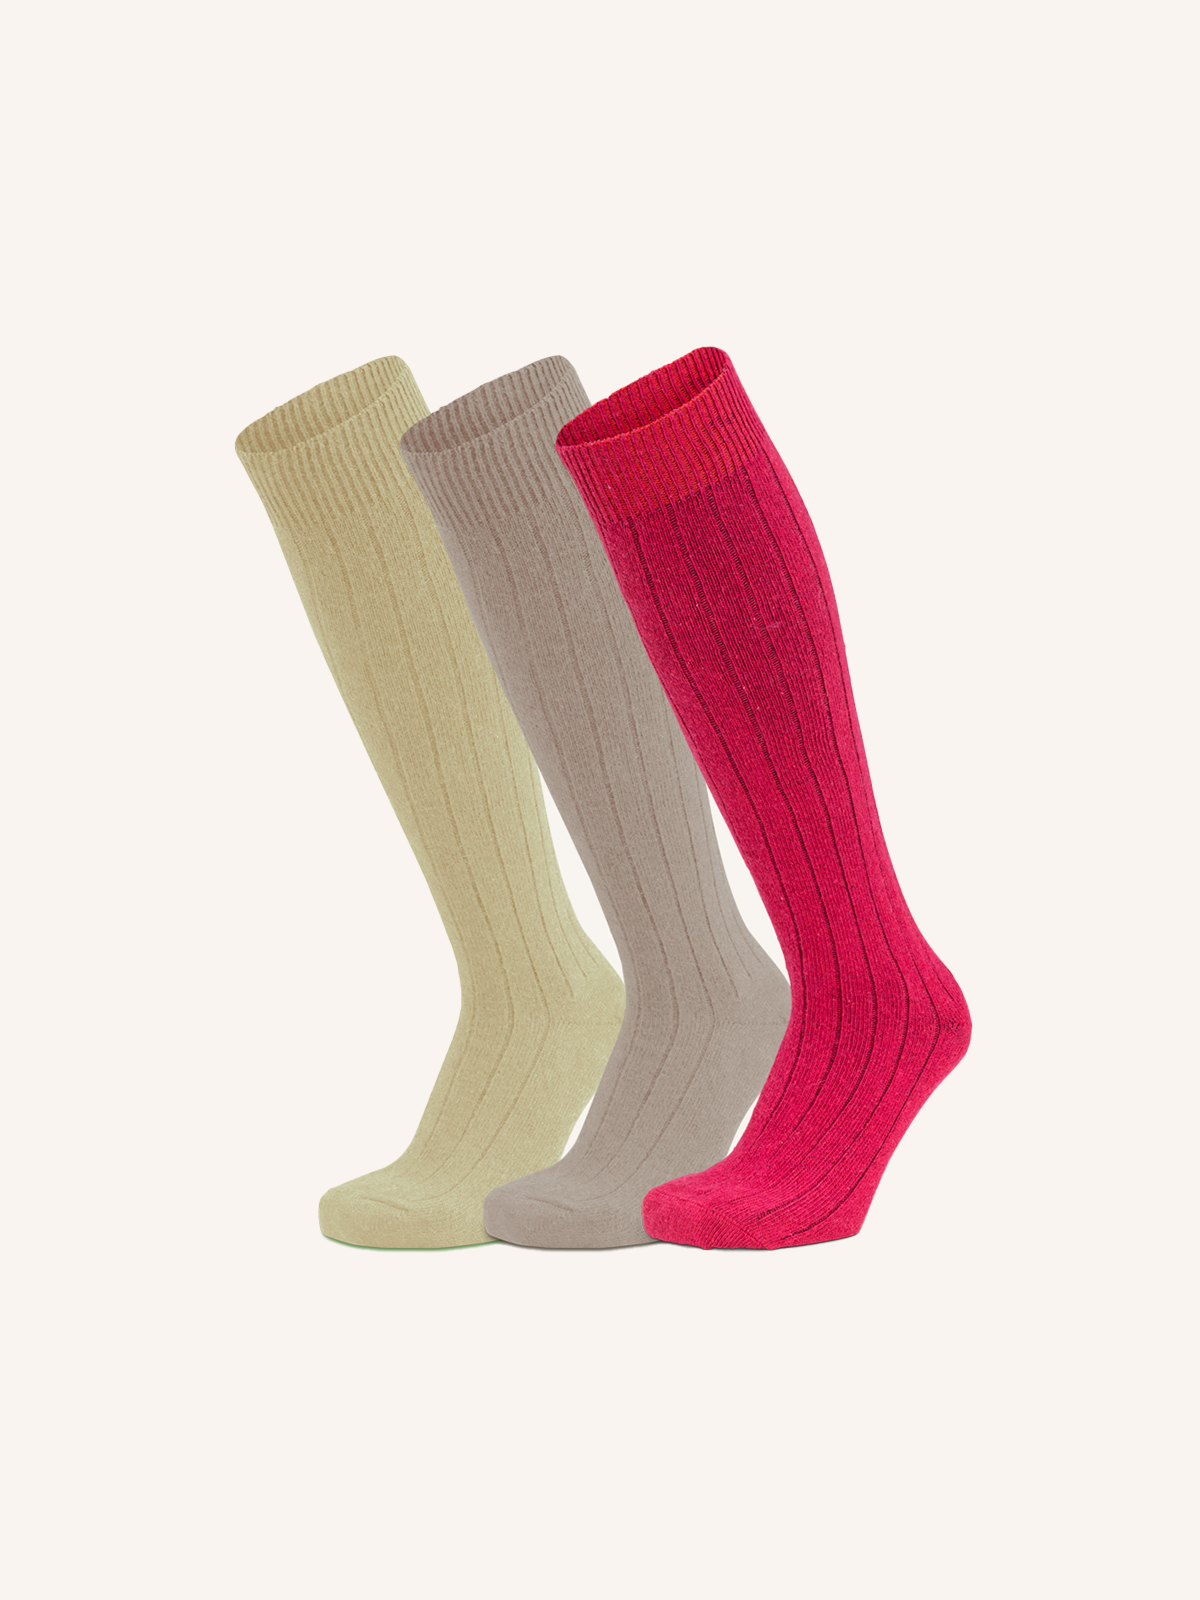 Long Socks in Angora, Cotton and Viscose for Women | Plain Color | Pack of 3 Pairs | Angor